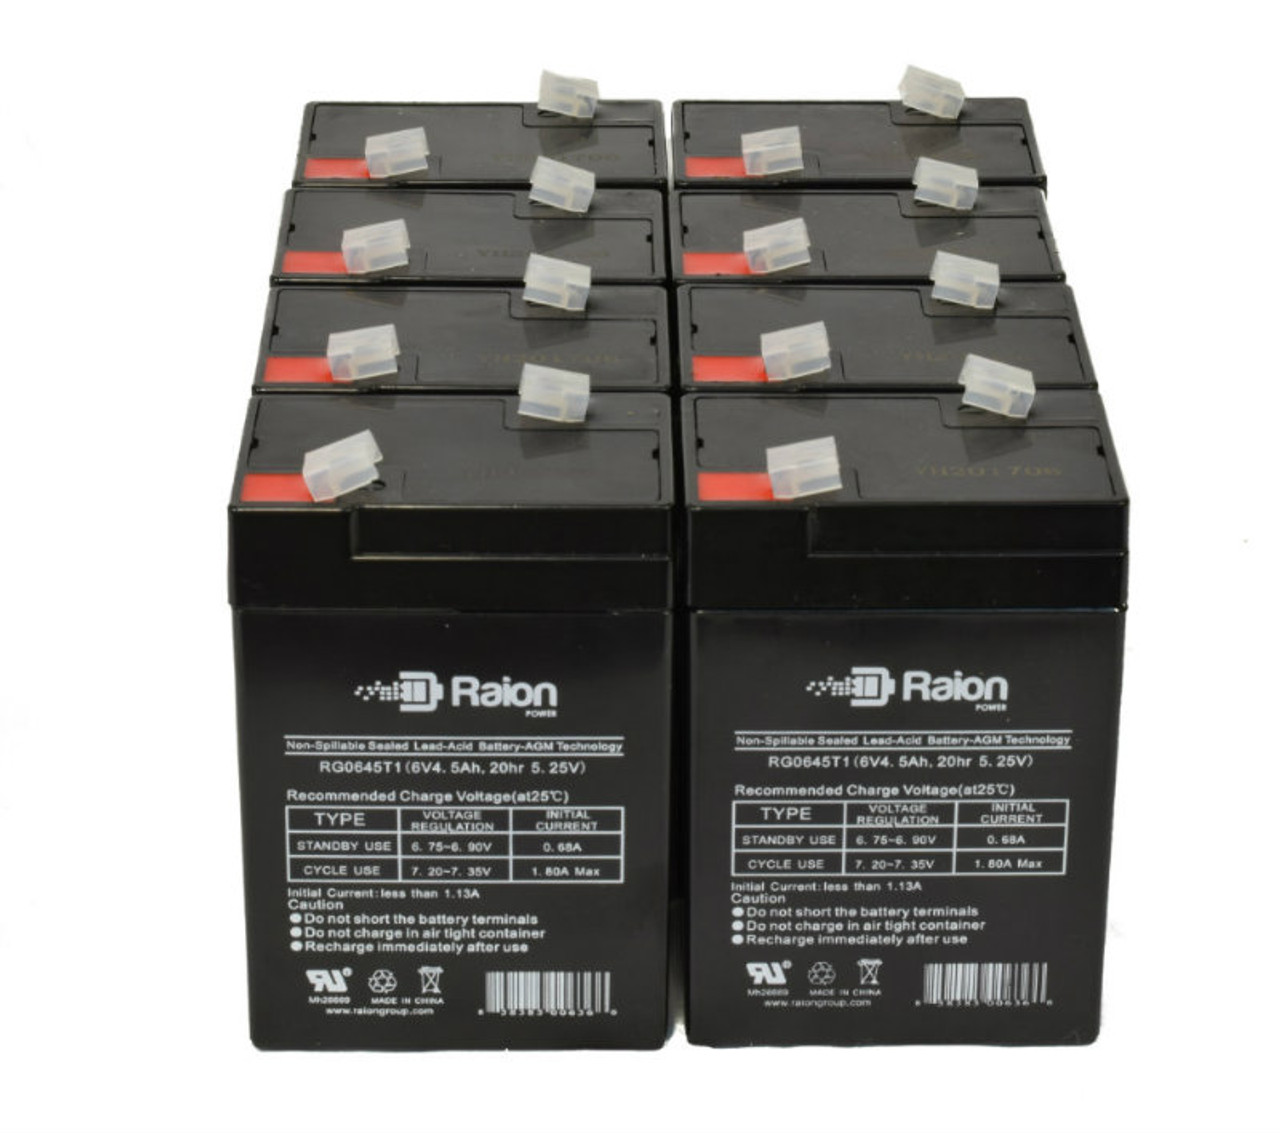 Raion Power RG0645T1 6V 4.5Ah Replacement Medical Equipment Battery for Welch Allyn CP200 ECG - 8 Pack